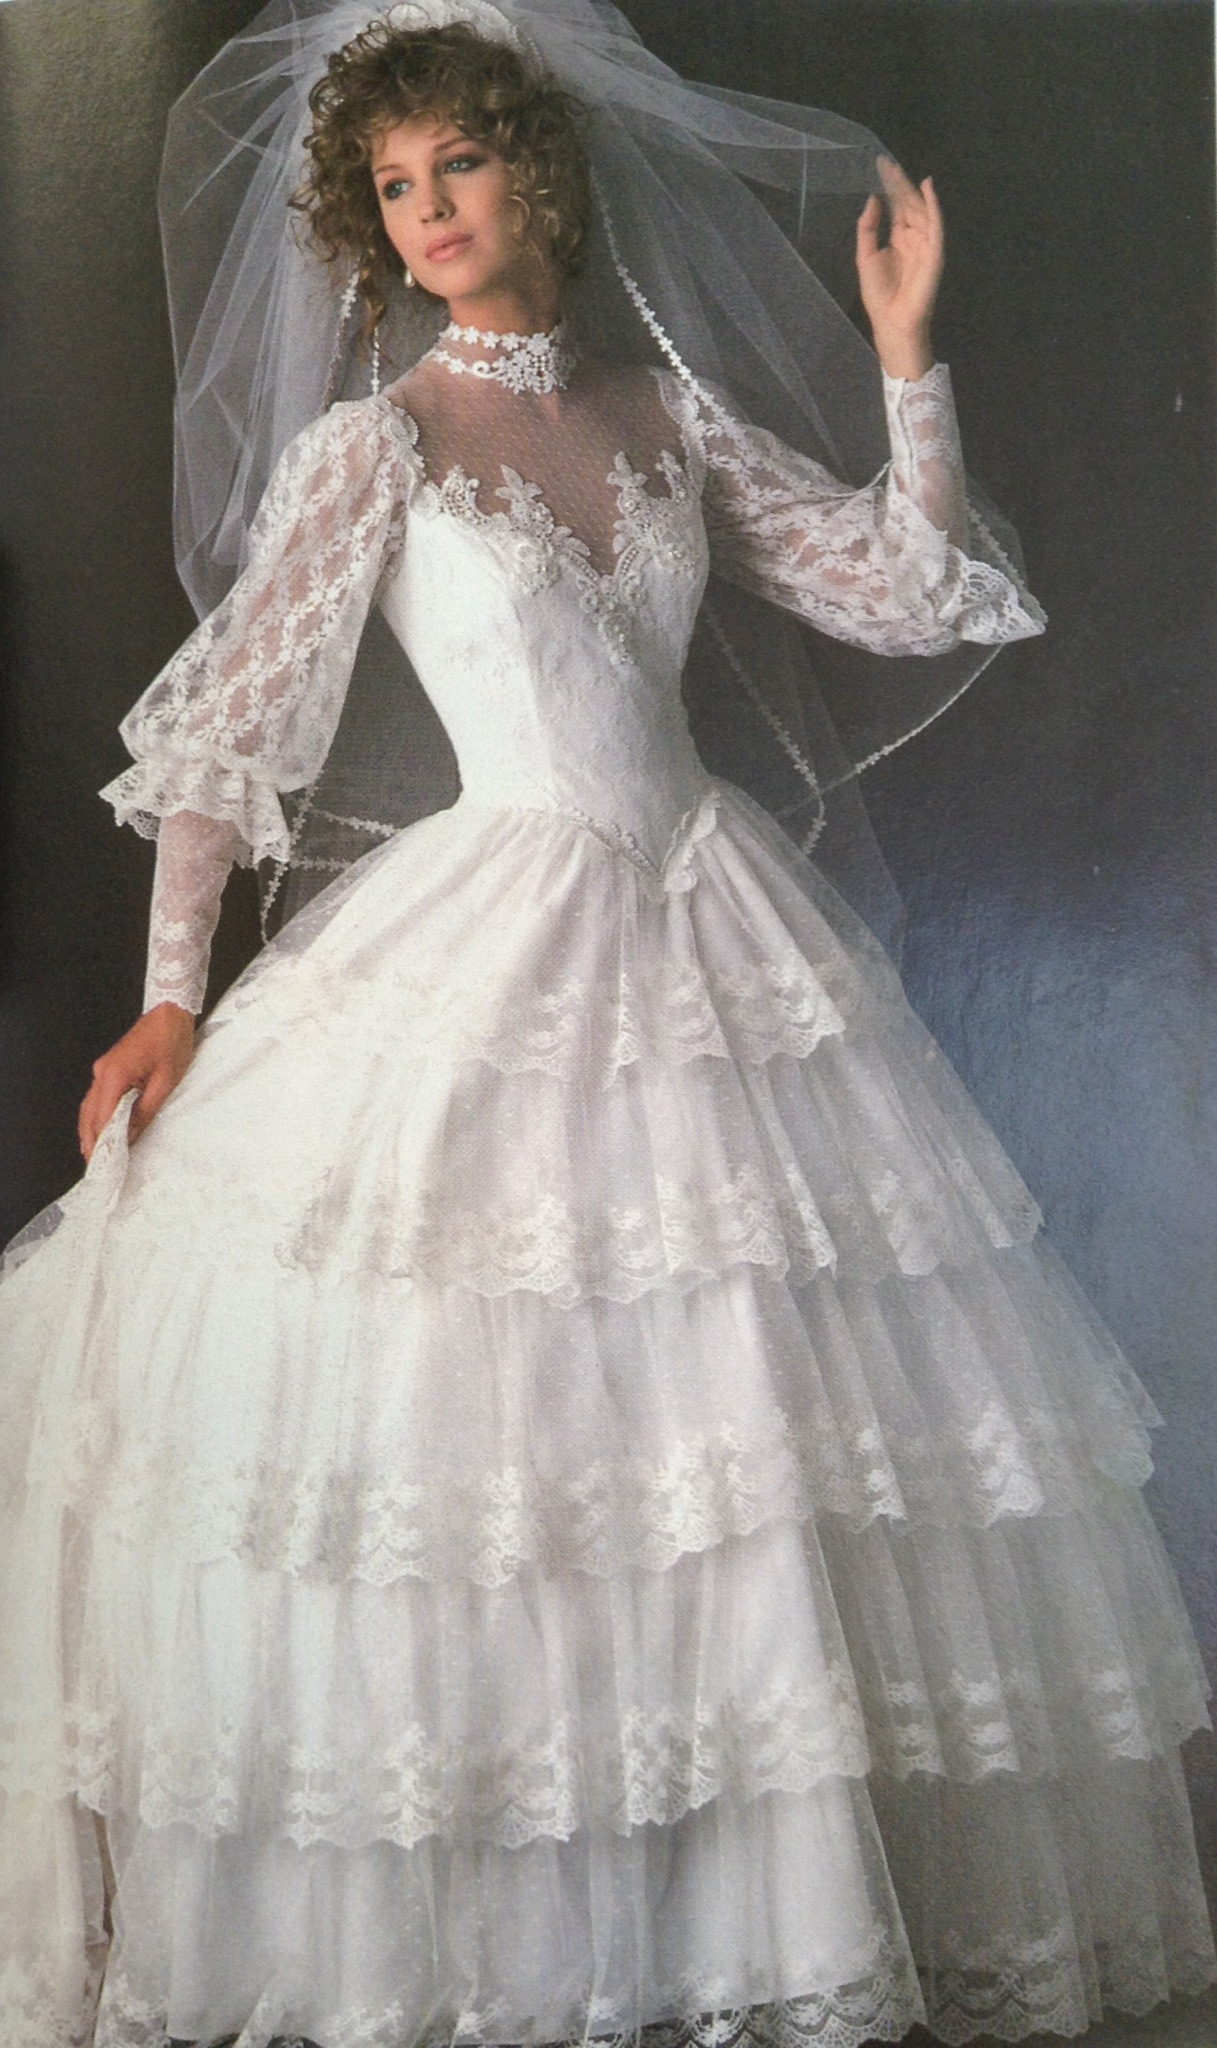 Terrible Wedding Dresses
 80s Fashion Exclusive The 11 Worst Wedding Gowns